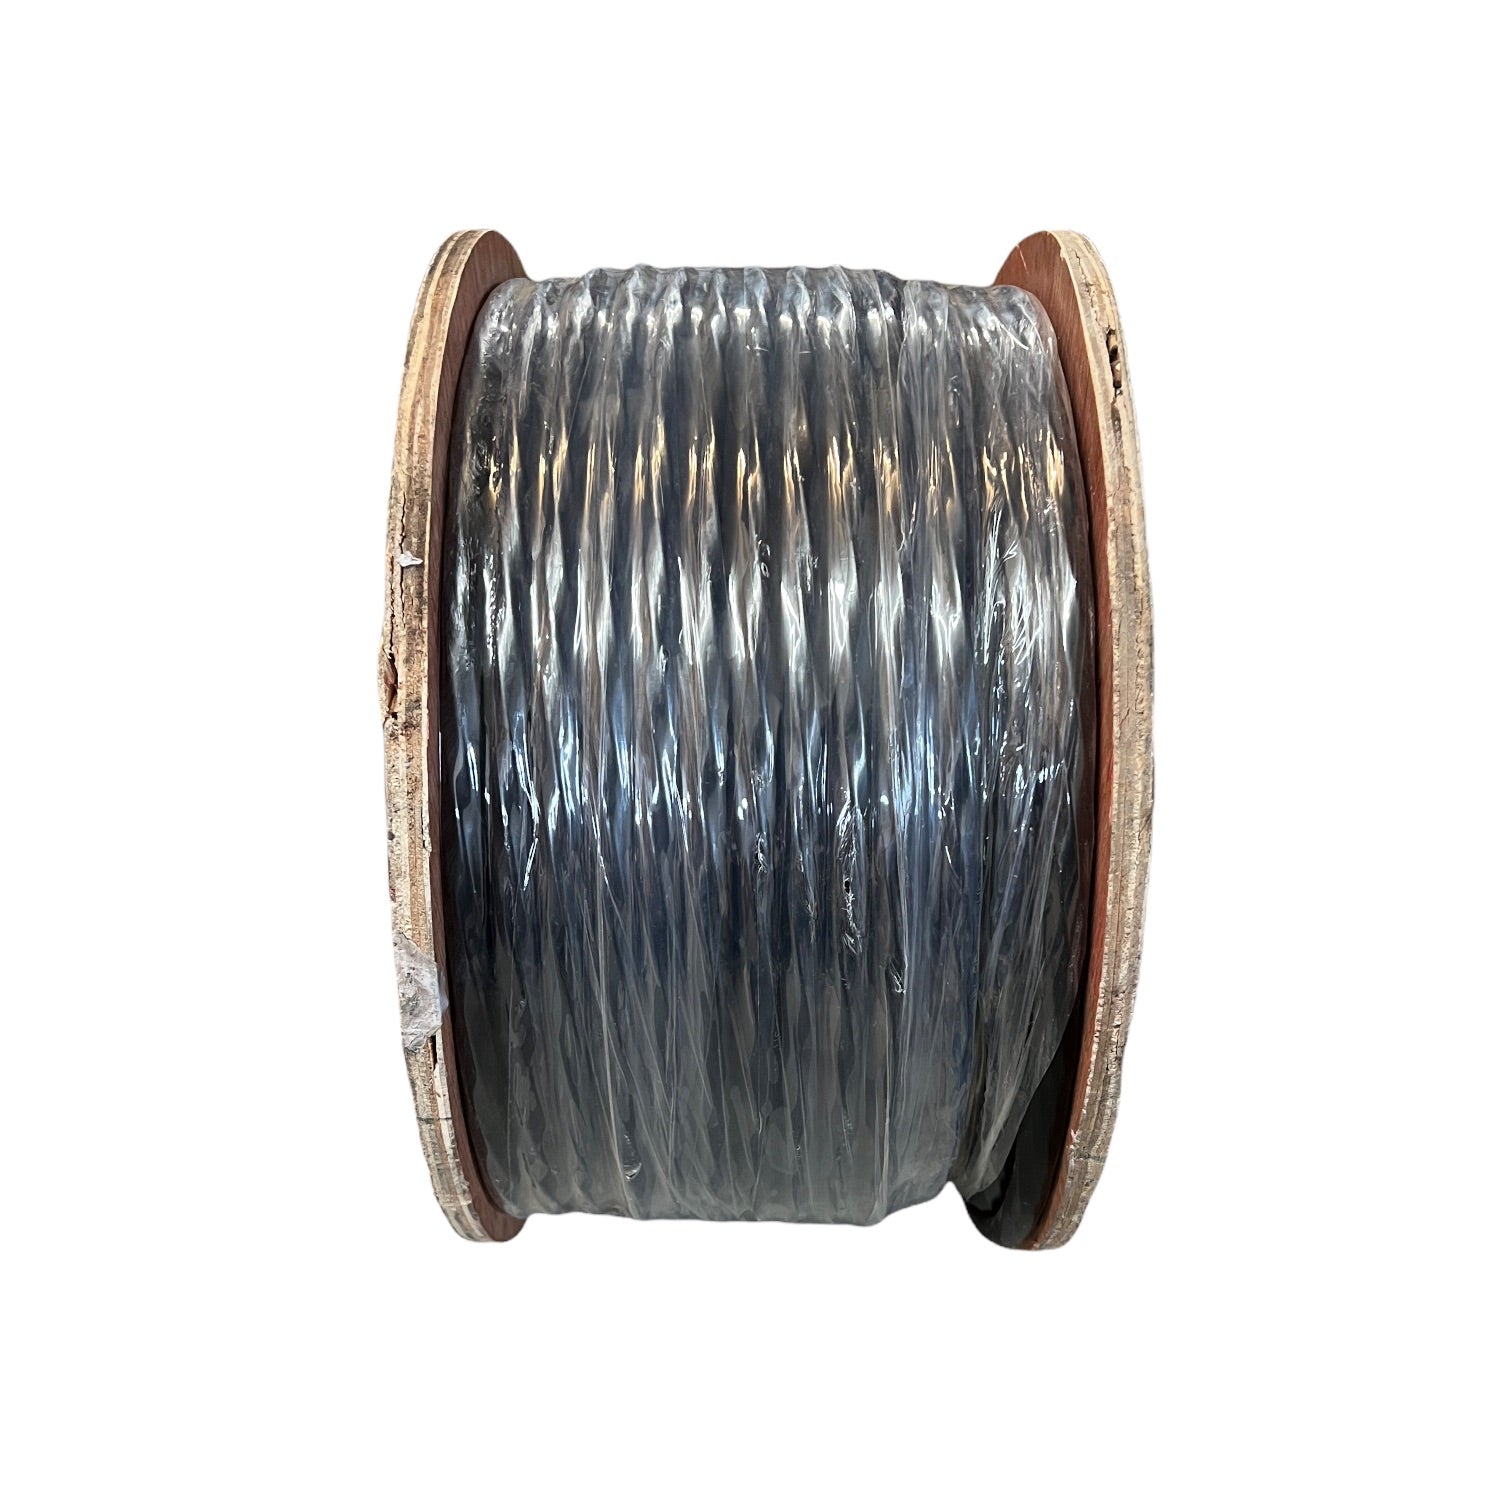 18/16X1000 - Multi-Conductor Irrigation Control Wire, 18 awg, 18/16 X 1000 ft